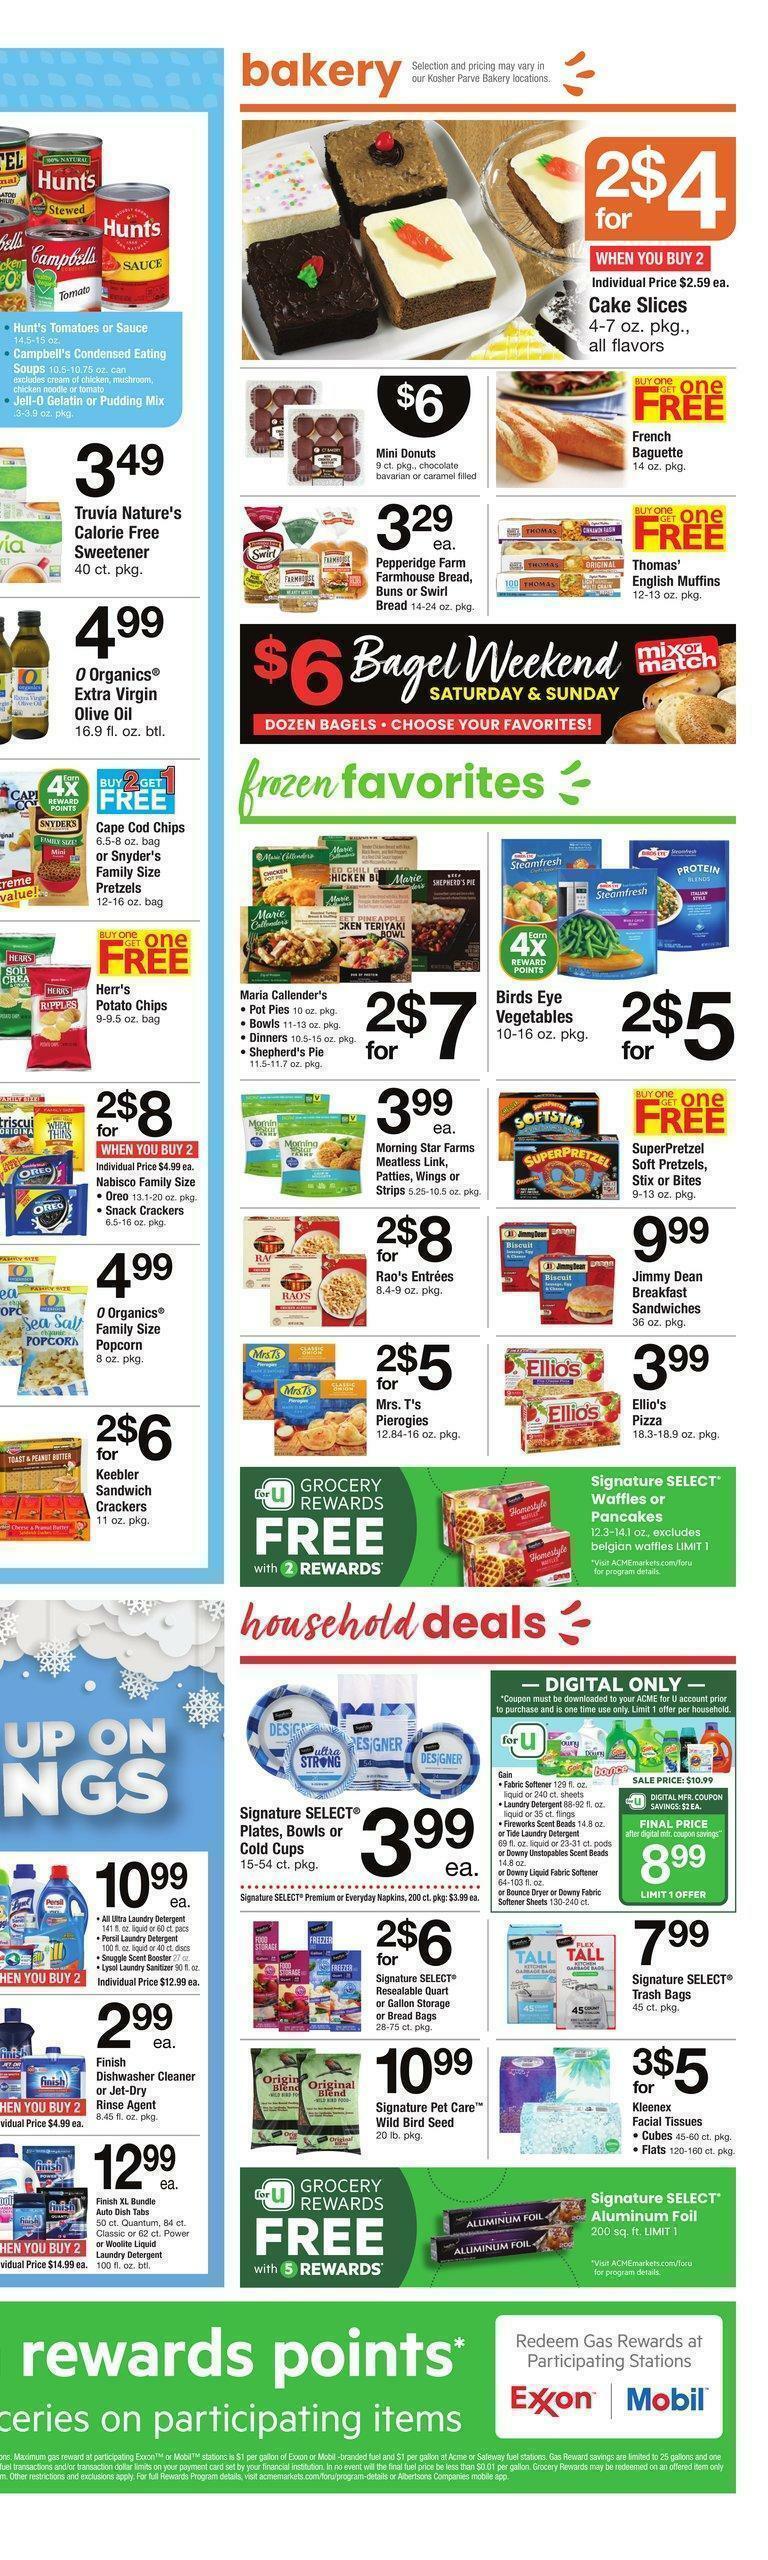 ACME Markets Weekly Ad from January 13